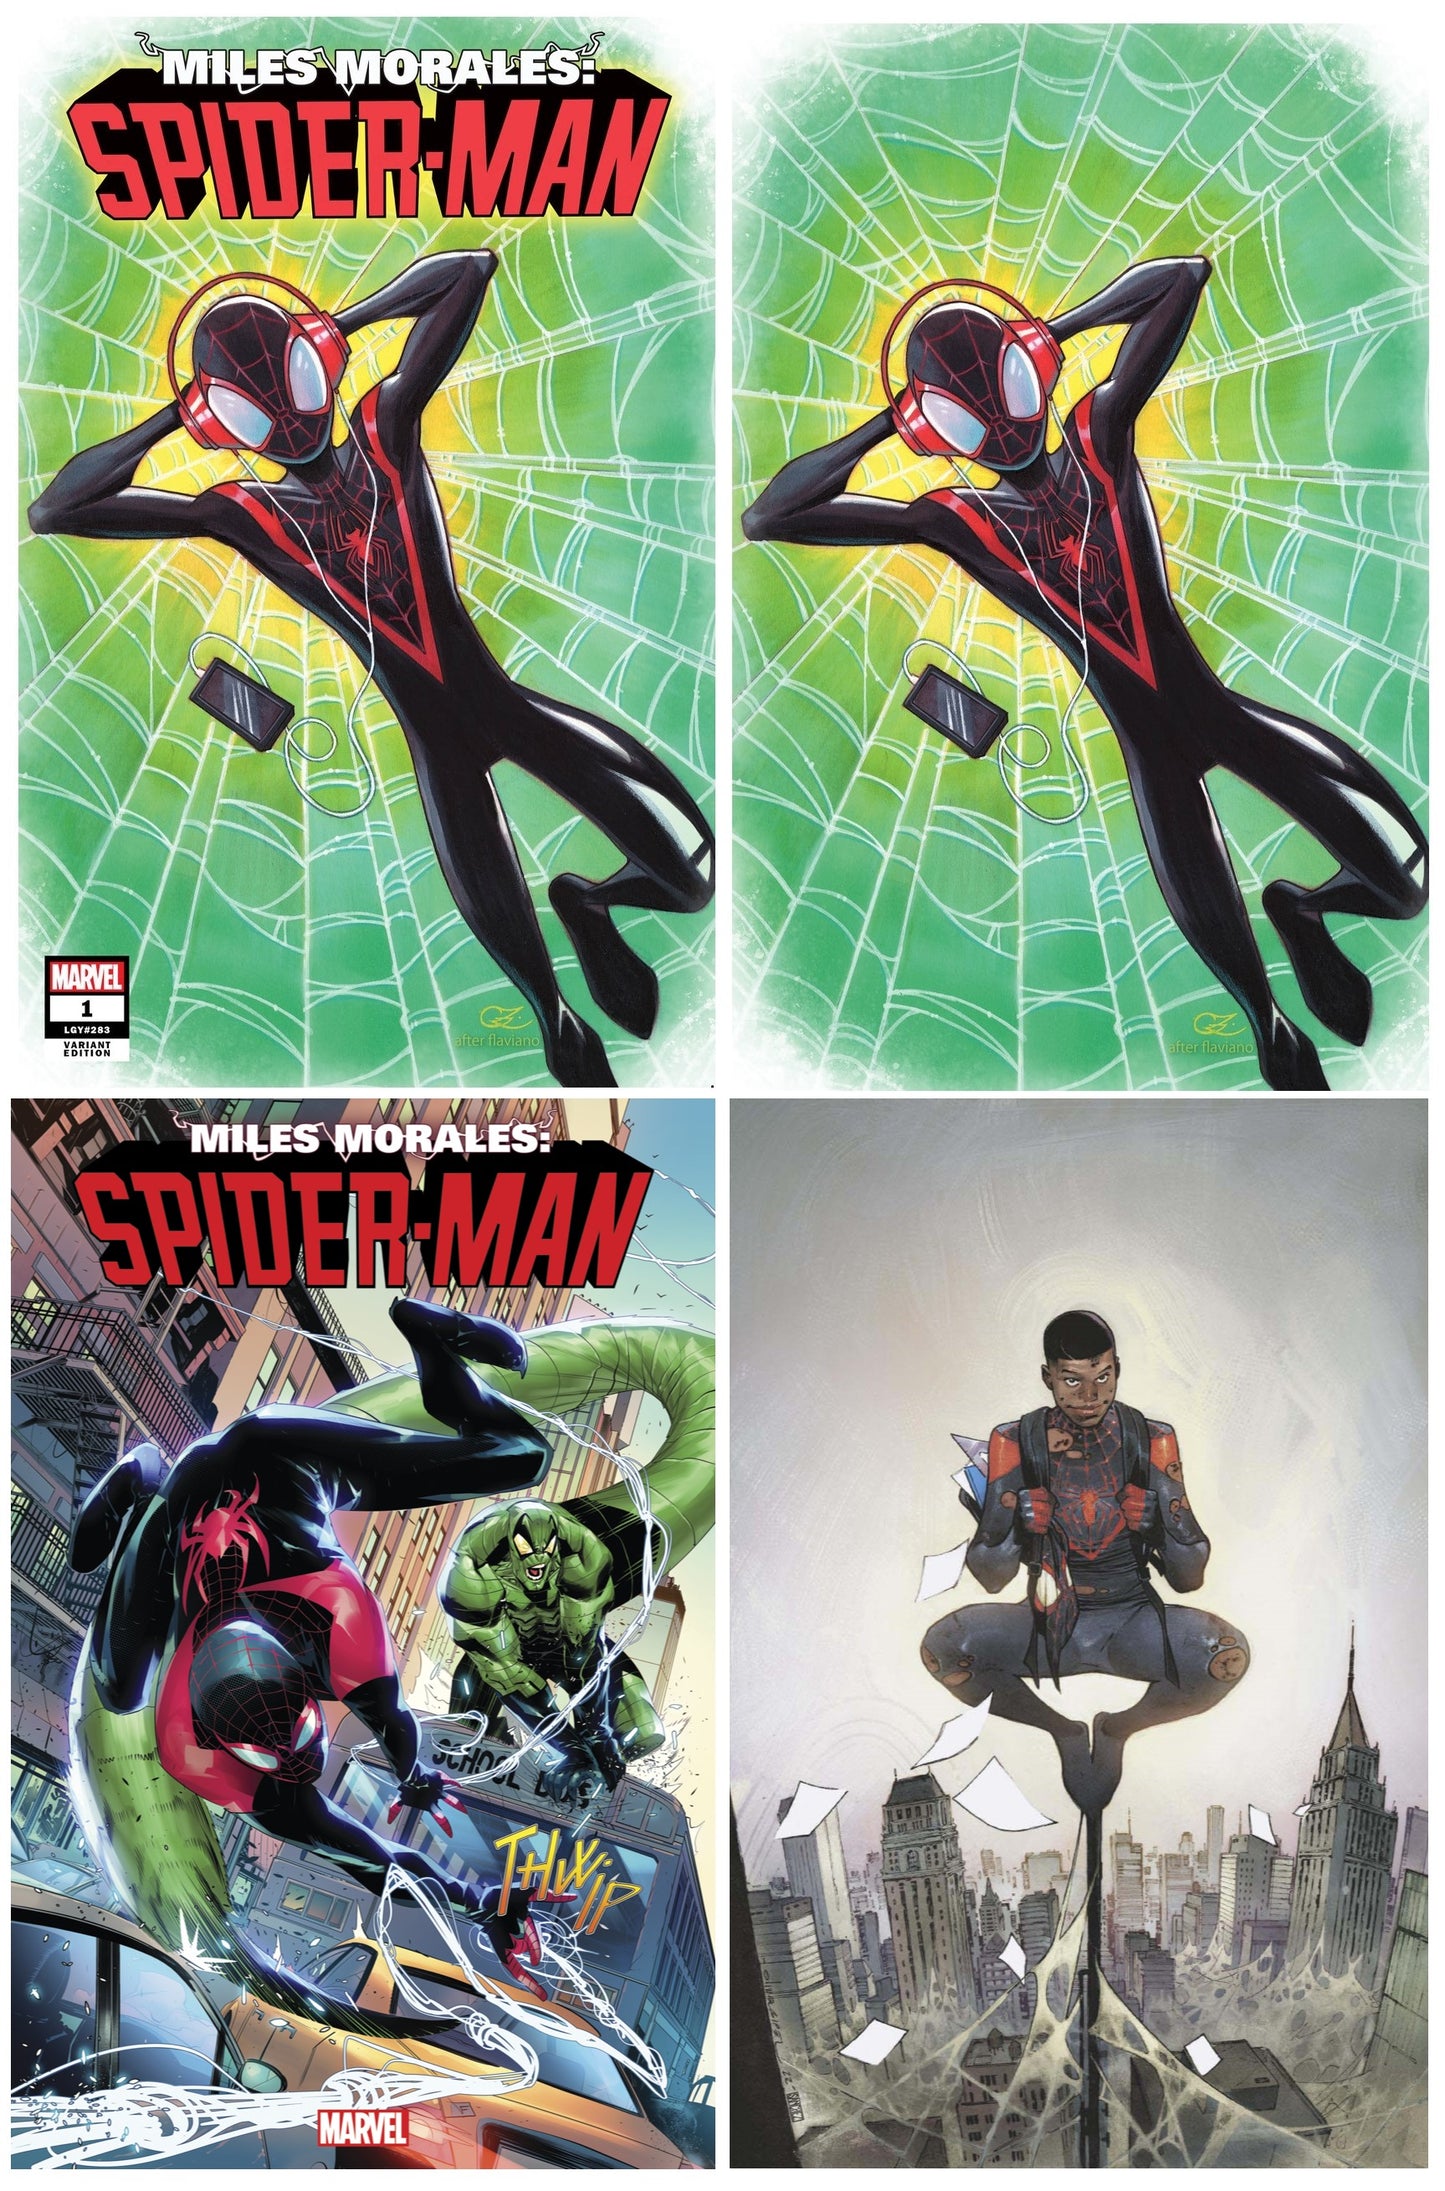 MILES MORALES SPIDER-MAN #1 CHRISSIE ZULLO TRADE/VIRGIN VARIANT SET LIMITED TO 500 SETS WITH NUMBERED COA + 1:25 & 1:100 VARIANTS